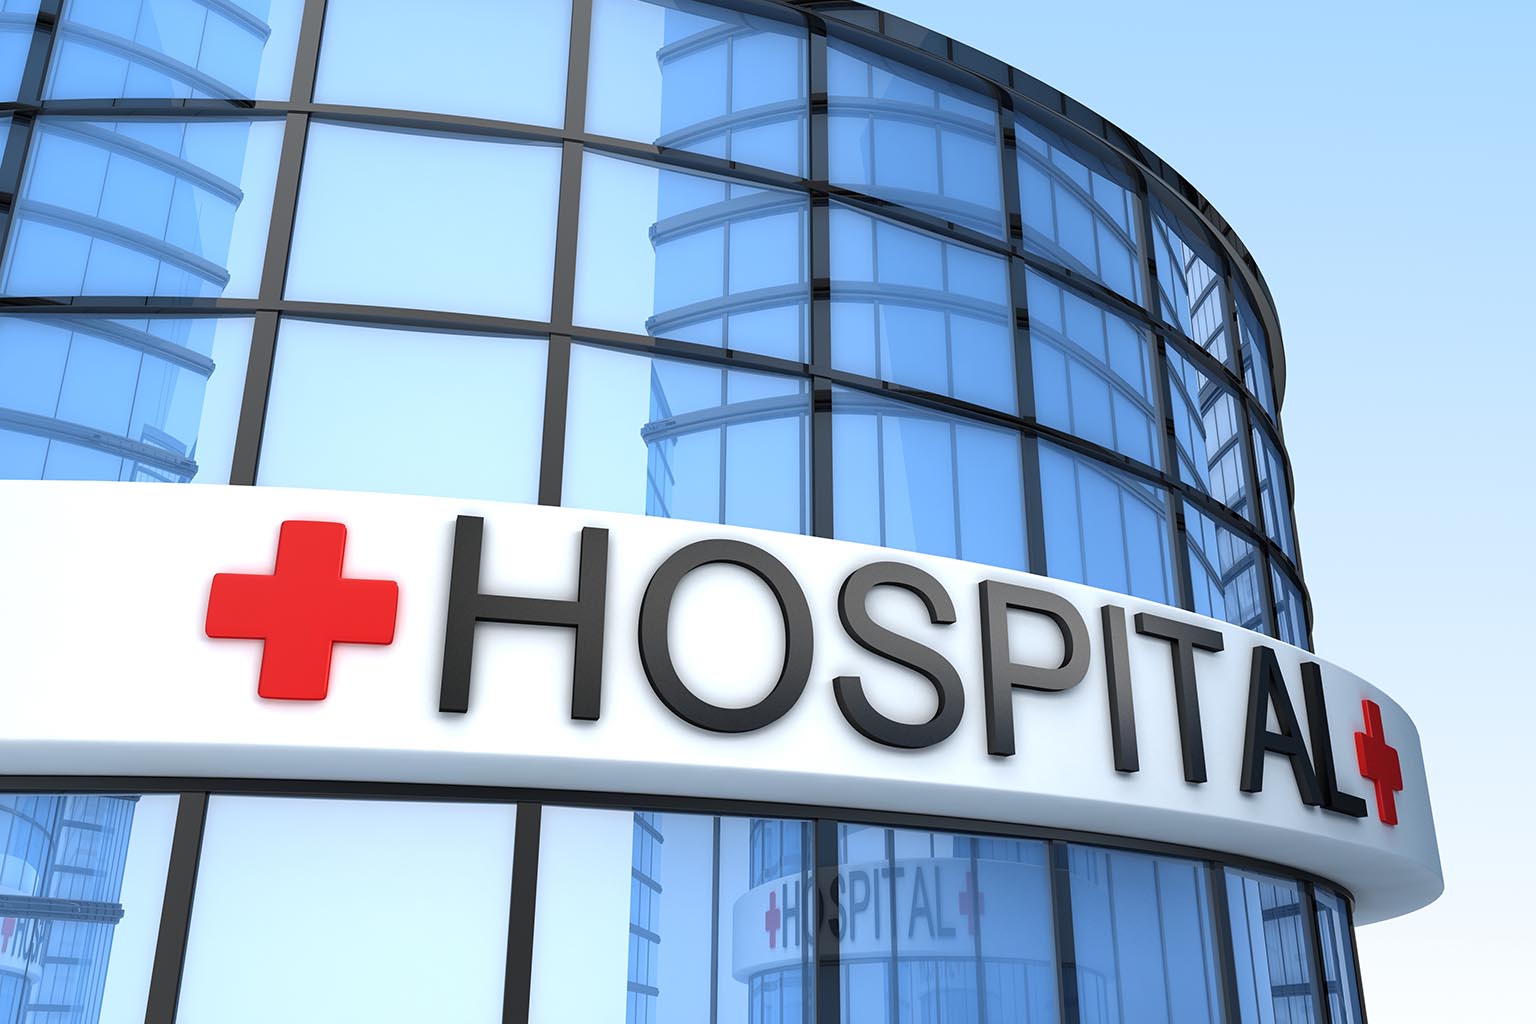 Tips for building an effective hospital brand